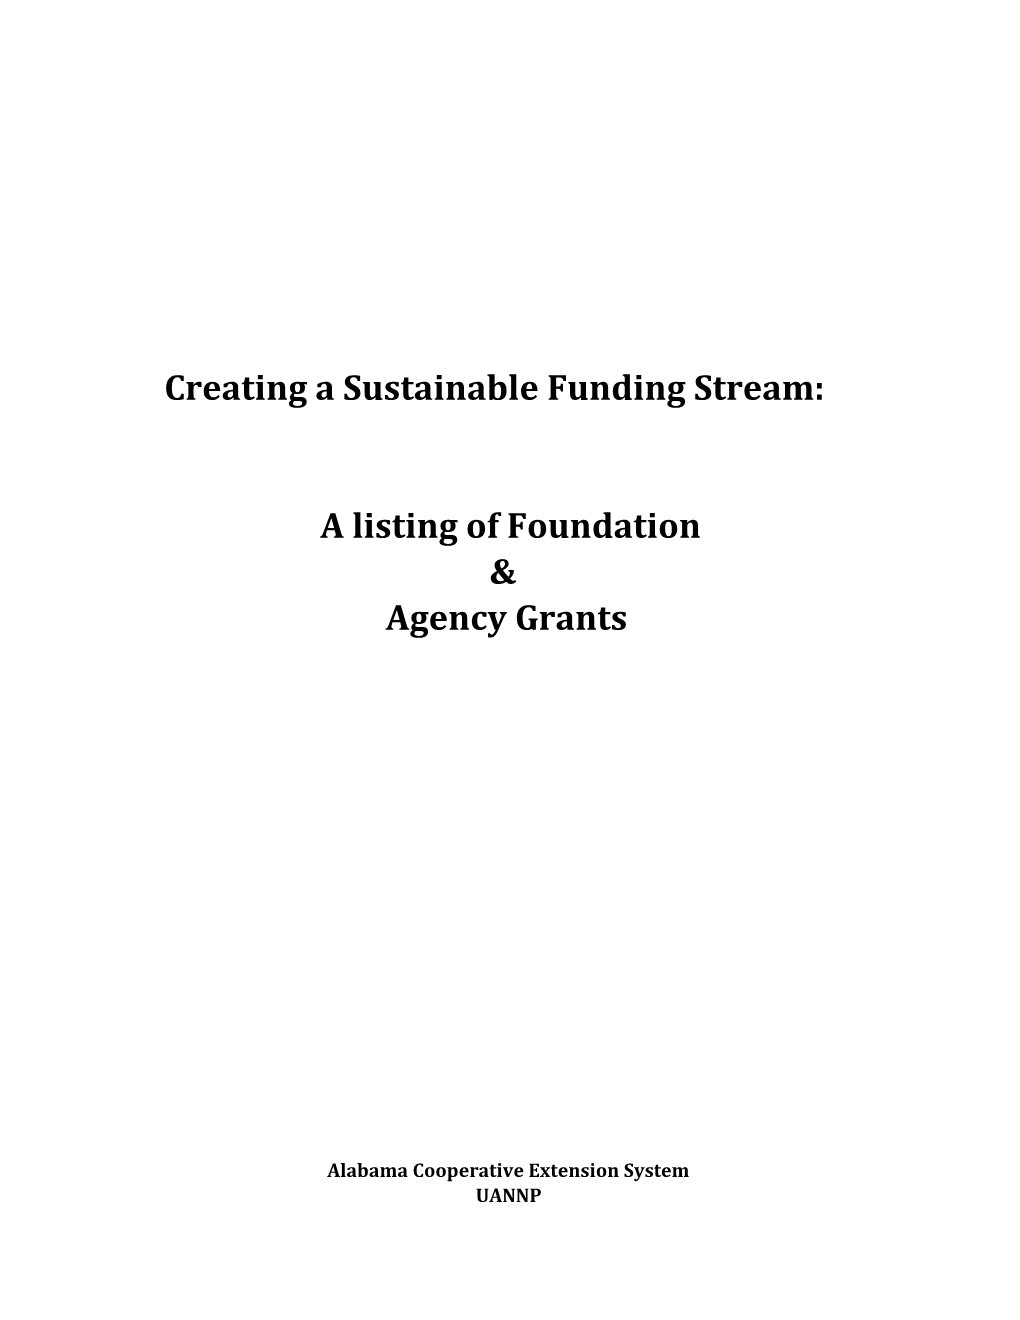 Creating a Sustainable Funding Stream